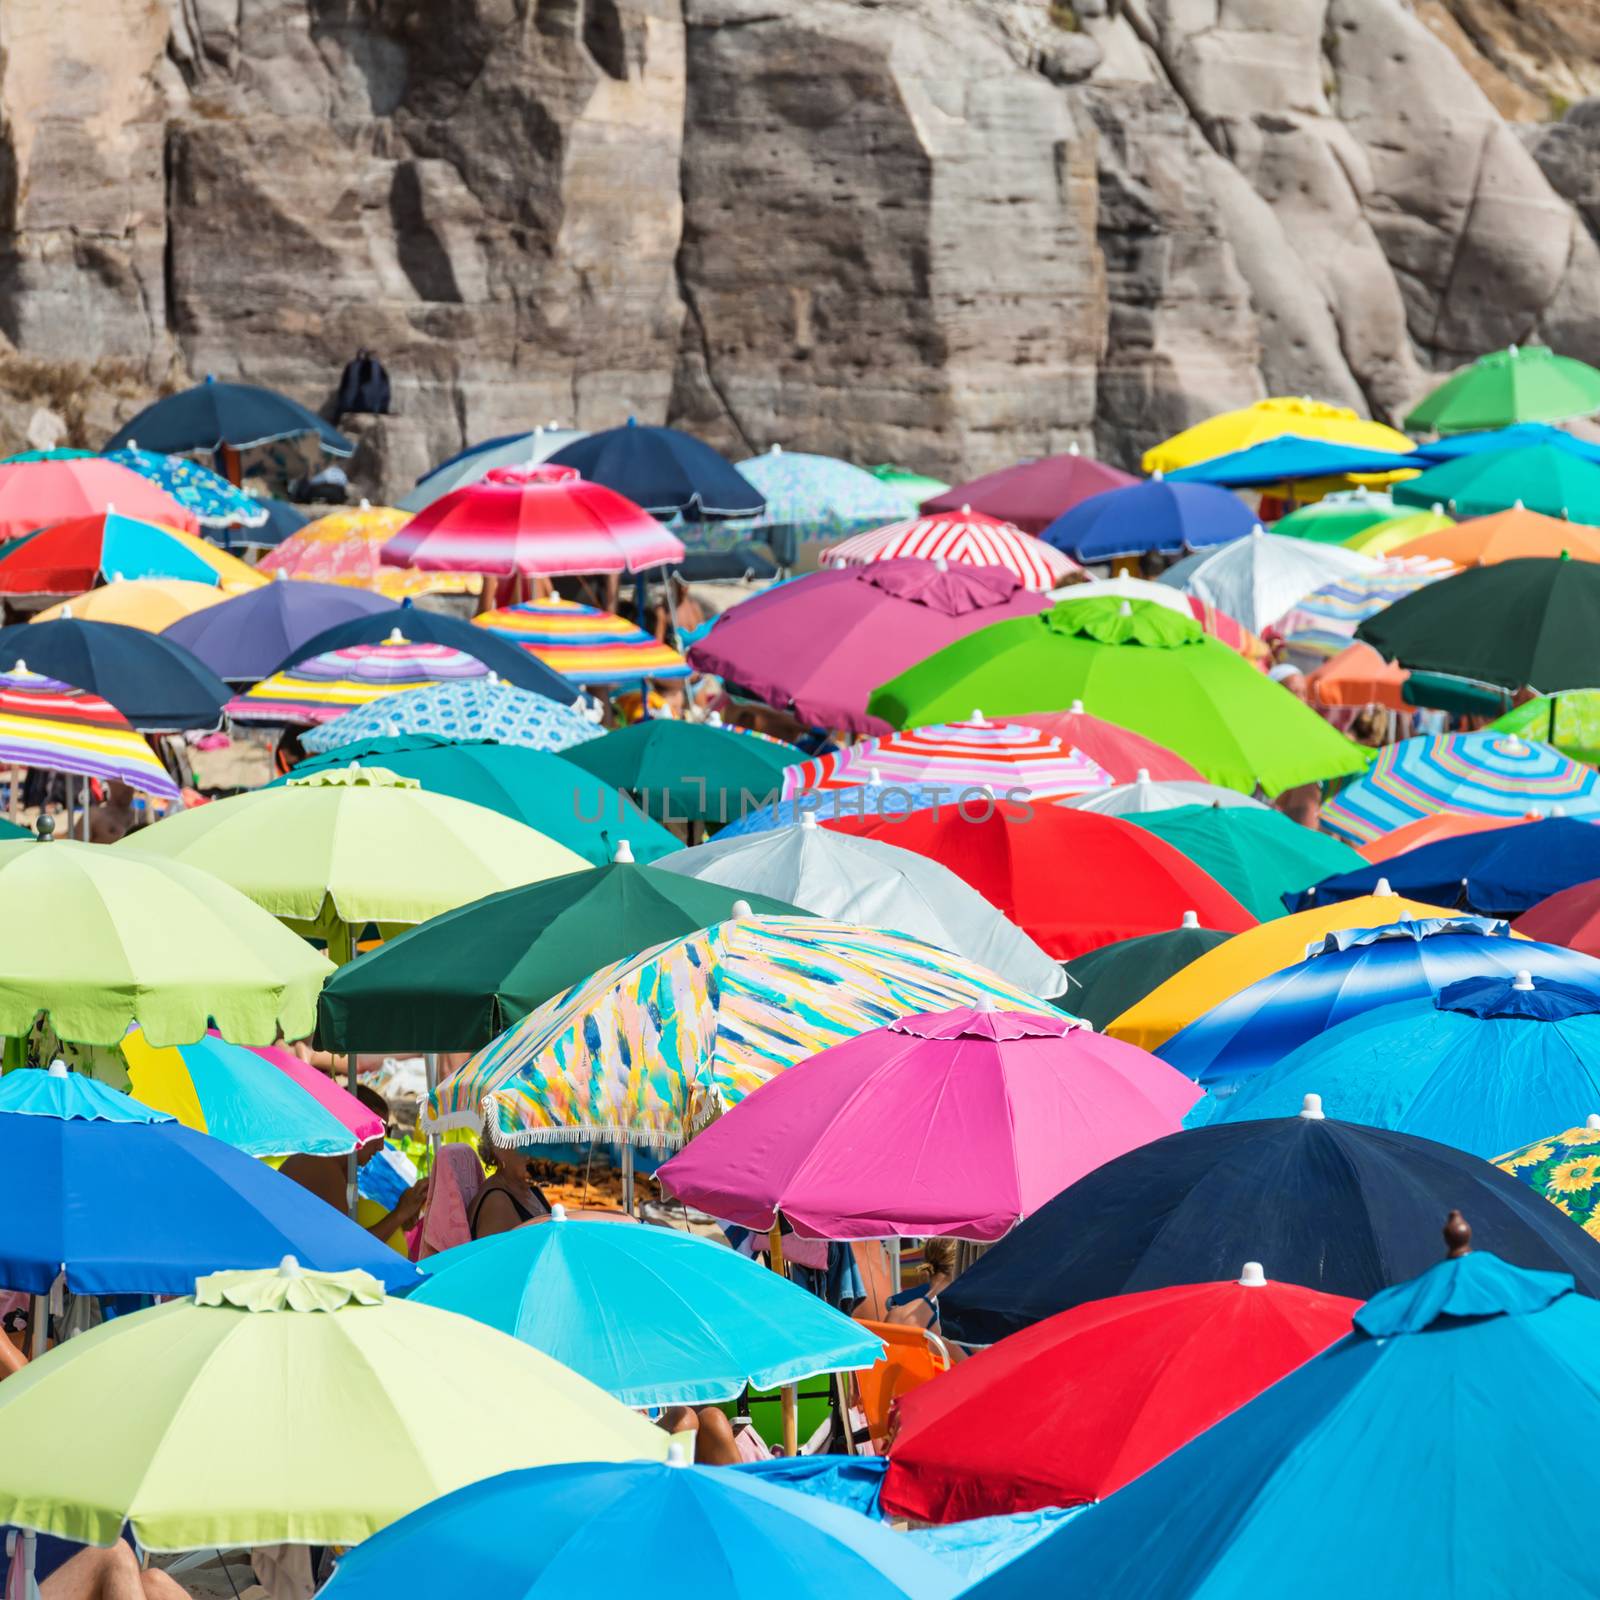 Many colorful umbrellas on the sandy beach.